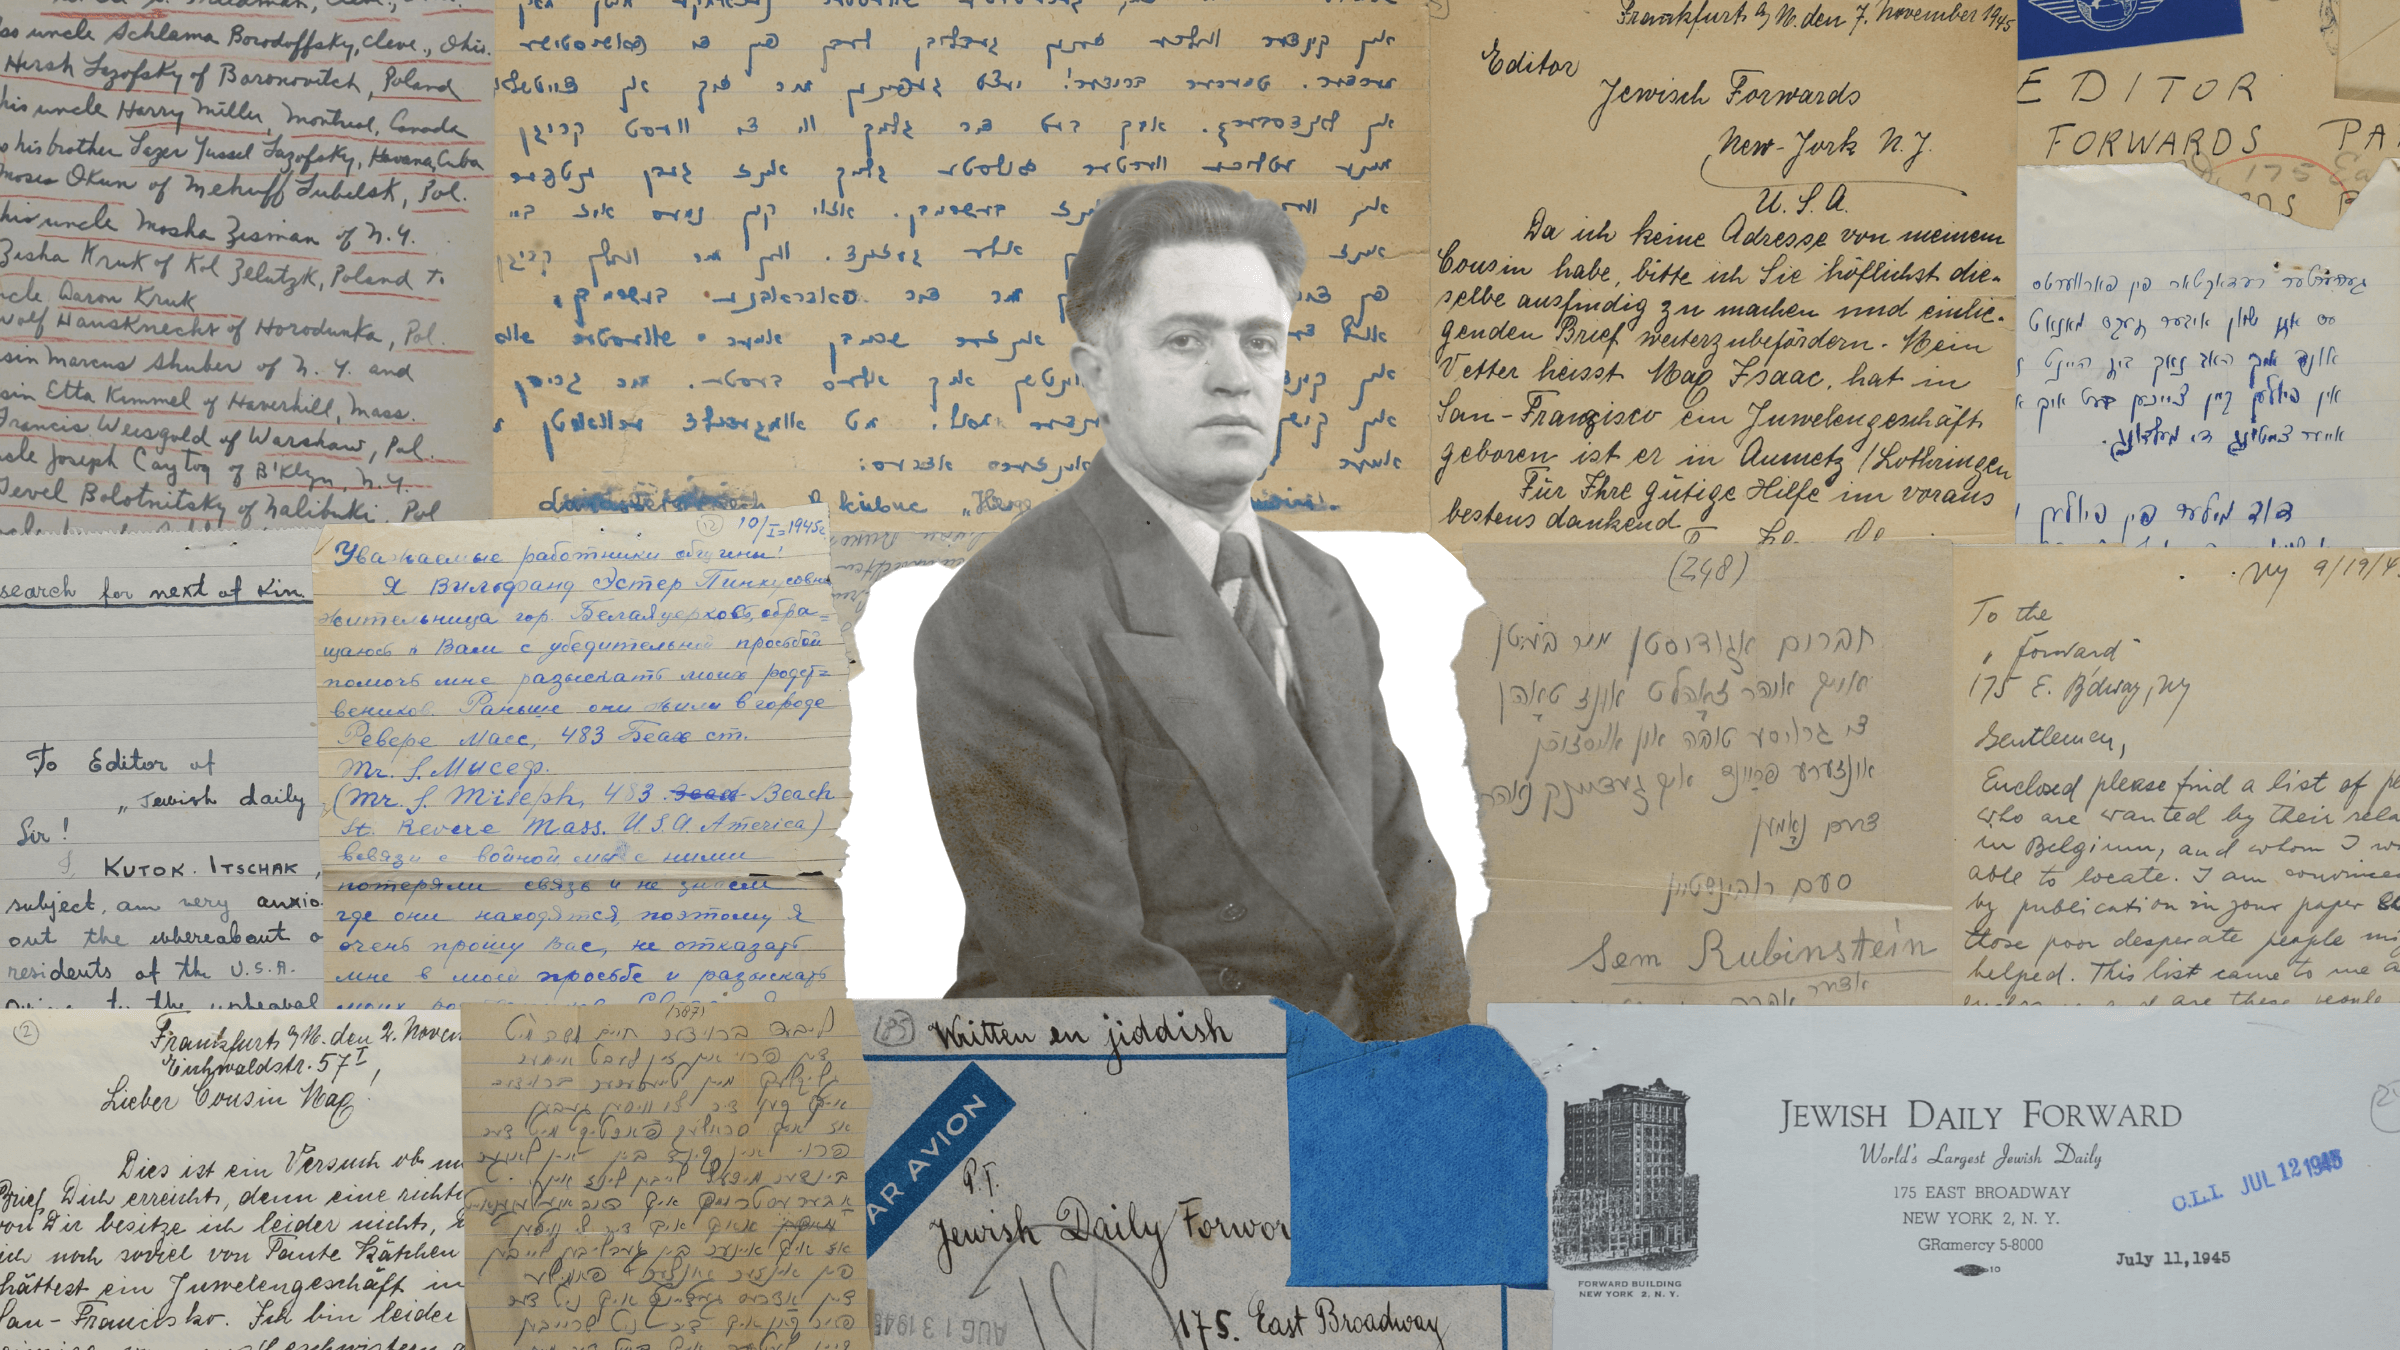 Isaac Metzker, a longtime Forward editor, credited for publicizing letters from Holocaust survivors to their relatives. 